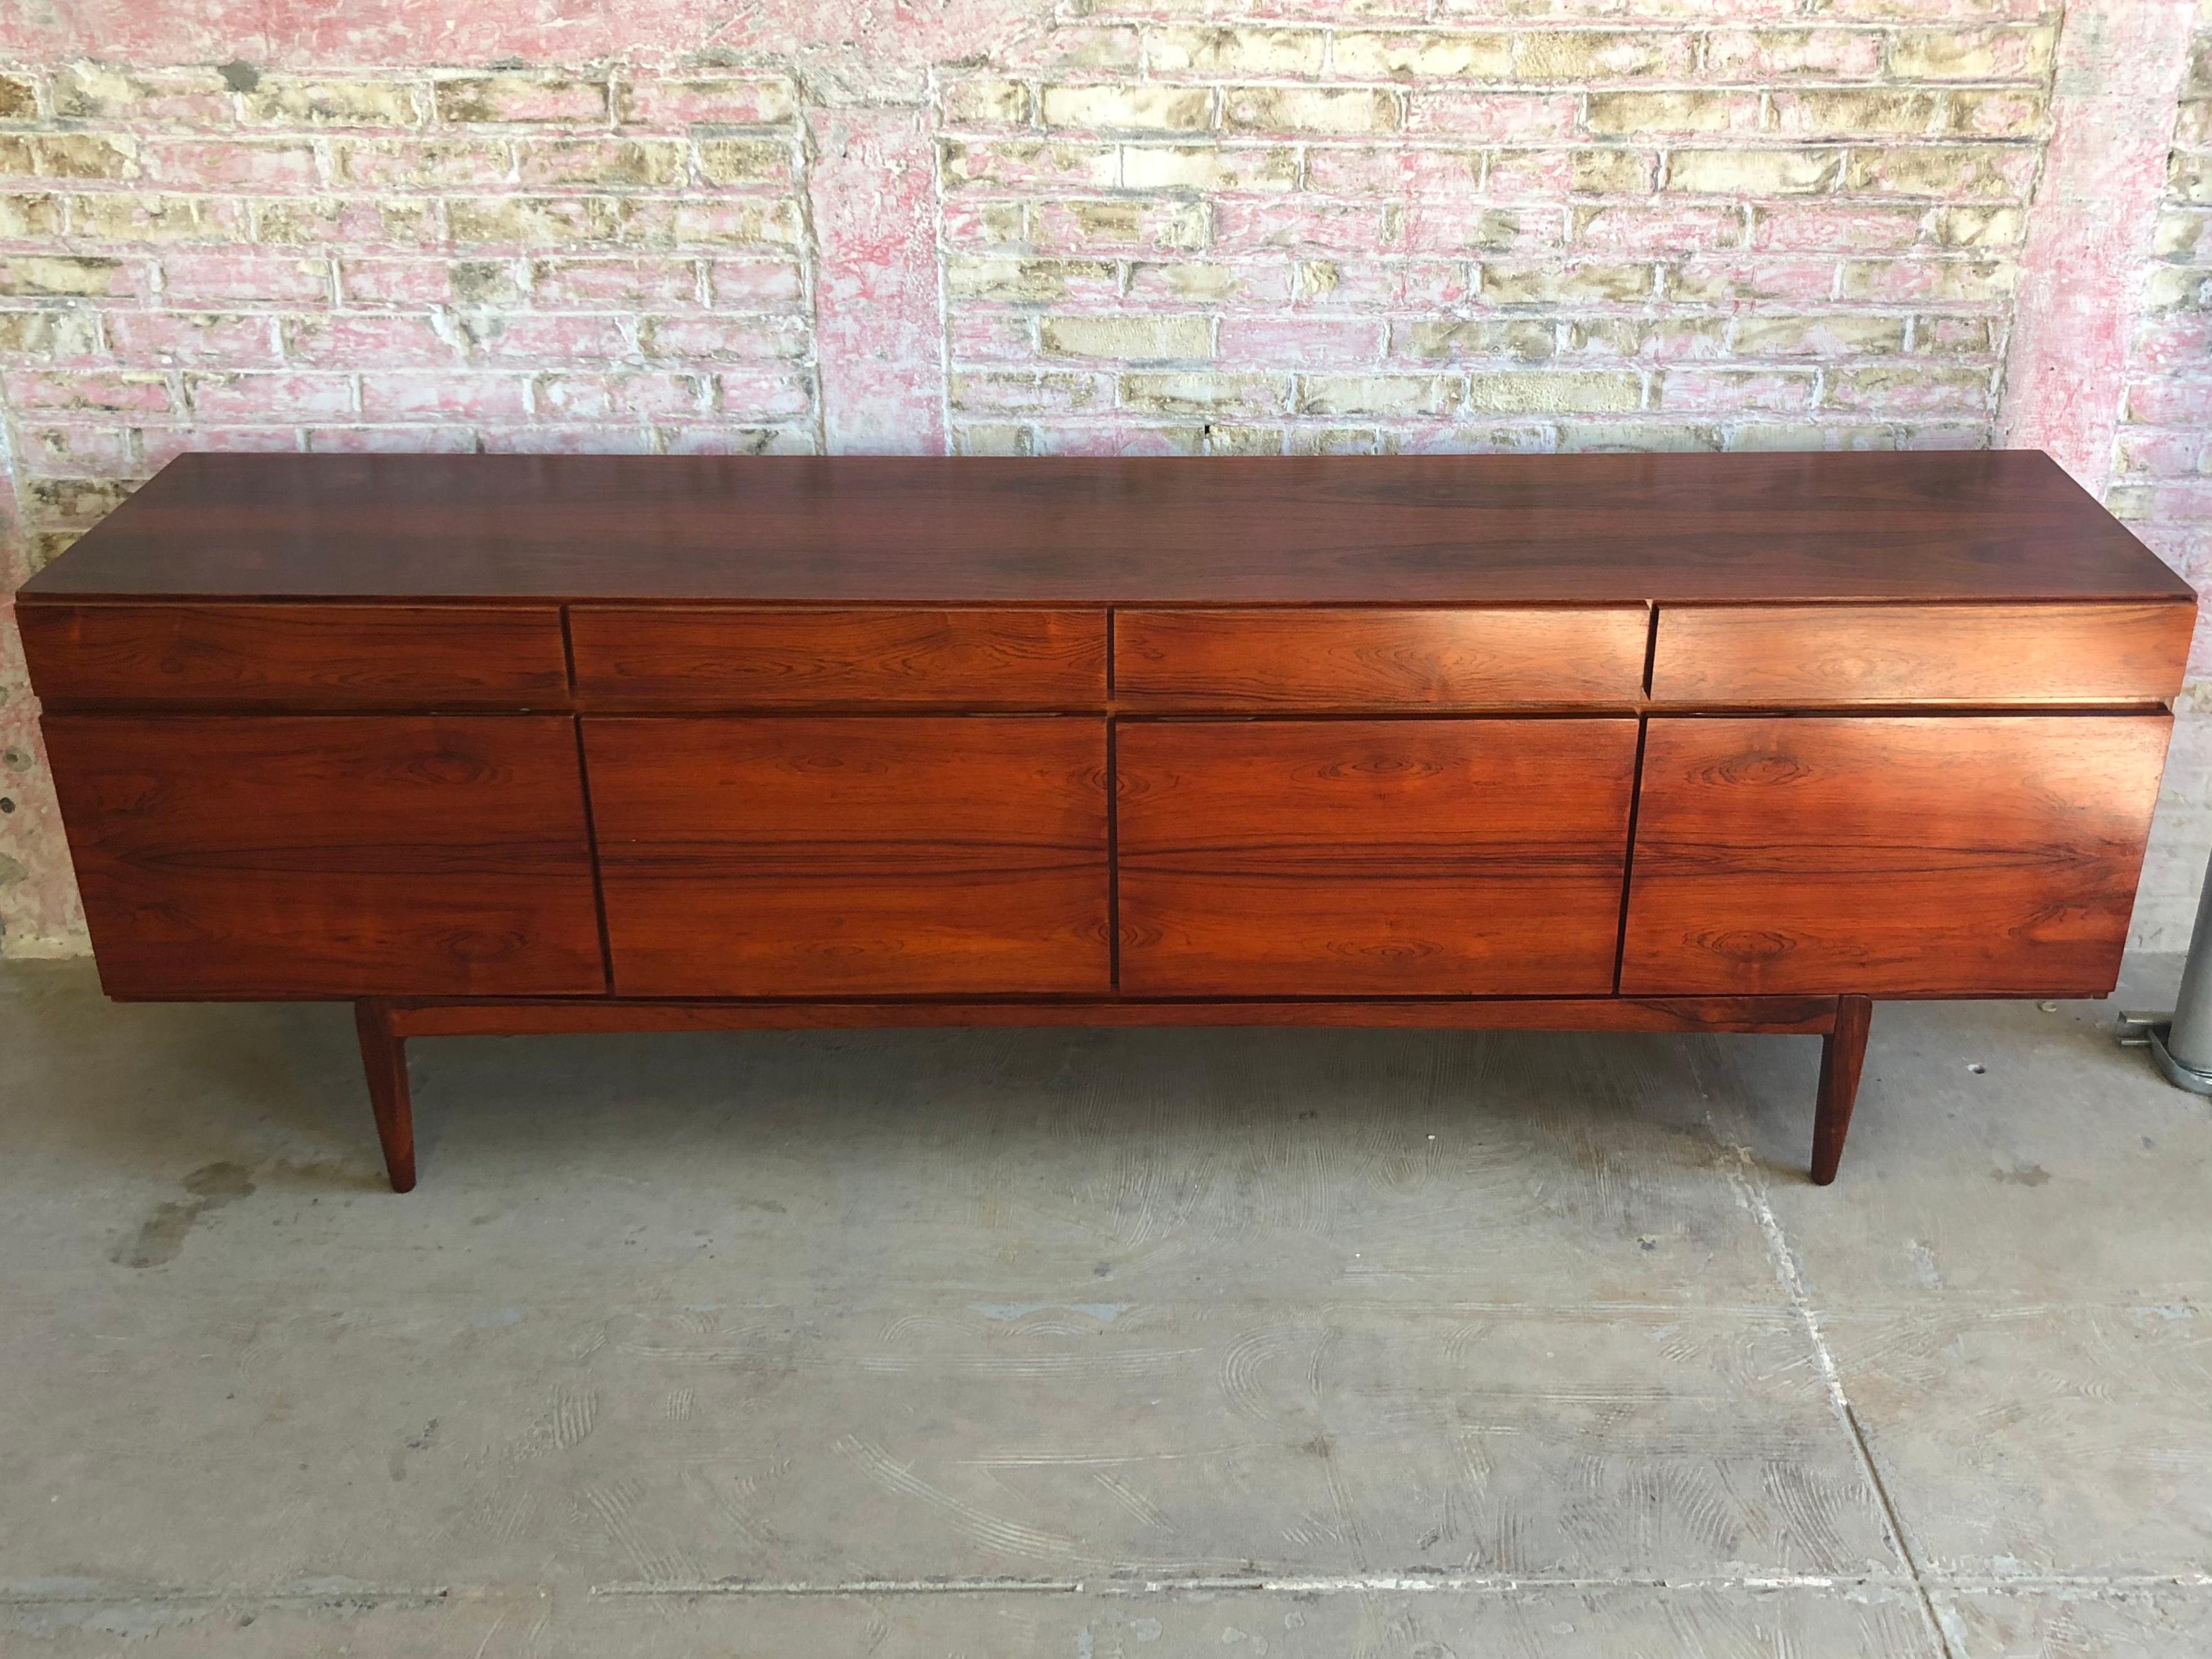 Stunning FA66 Brazilian rosewood credenza designed by Ib Kofod Larsen for Faarup Mobelfabrik, Denmark. This highly collectible Danish piece features a clean-lined design and offers ample storage with a combination of shelves and drawers. As a